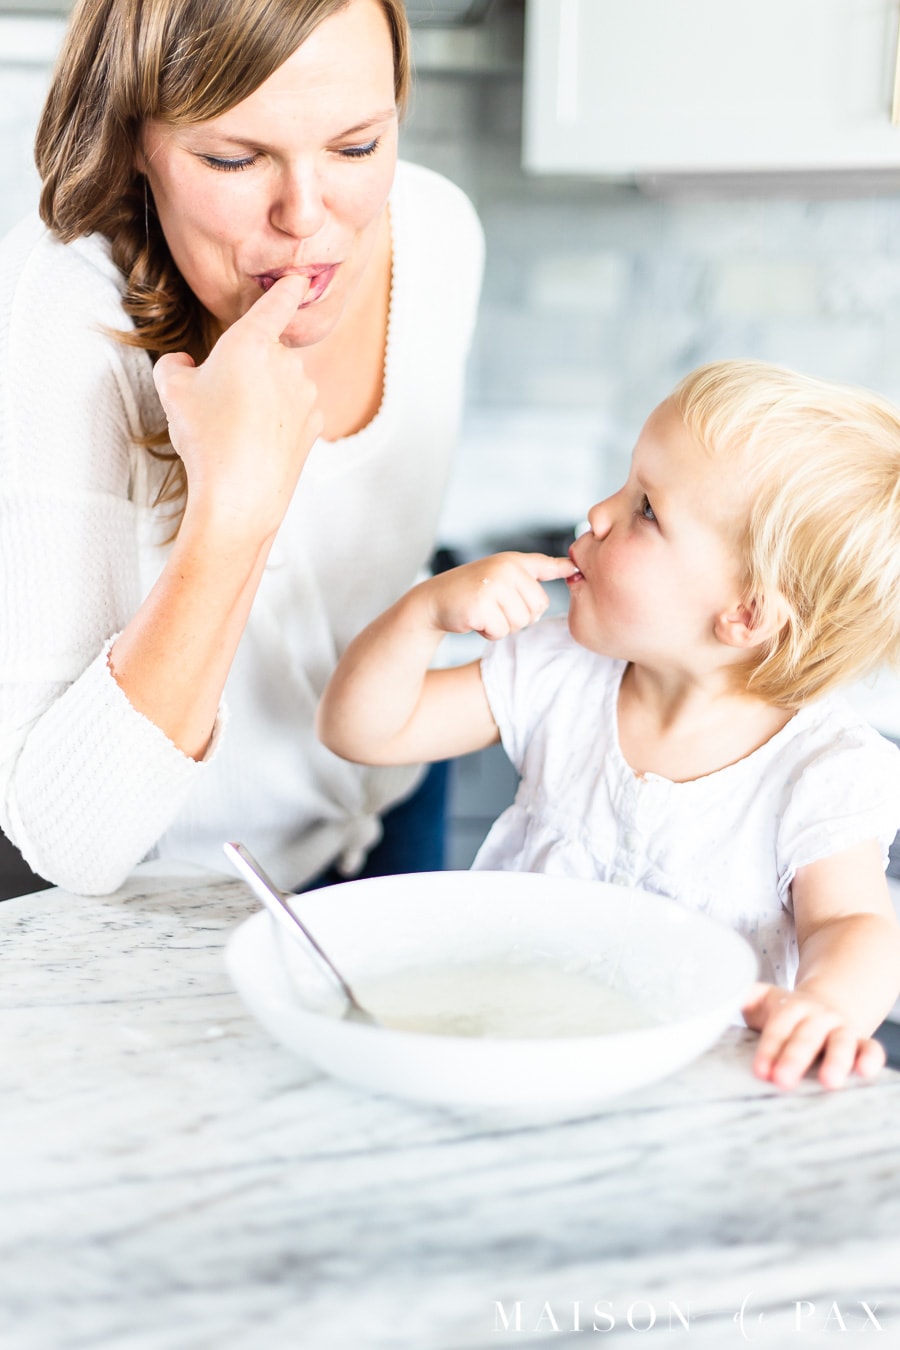 woman and child tasting icing | Maison de Pax